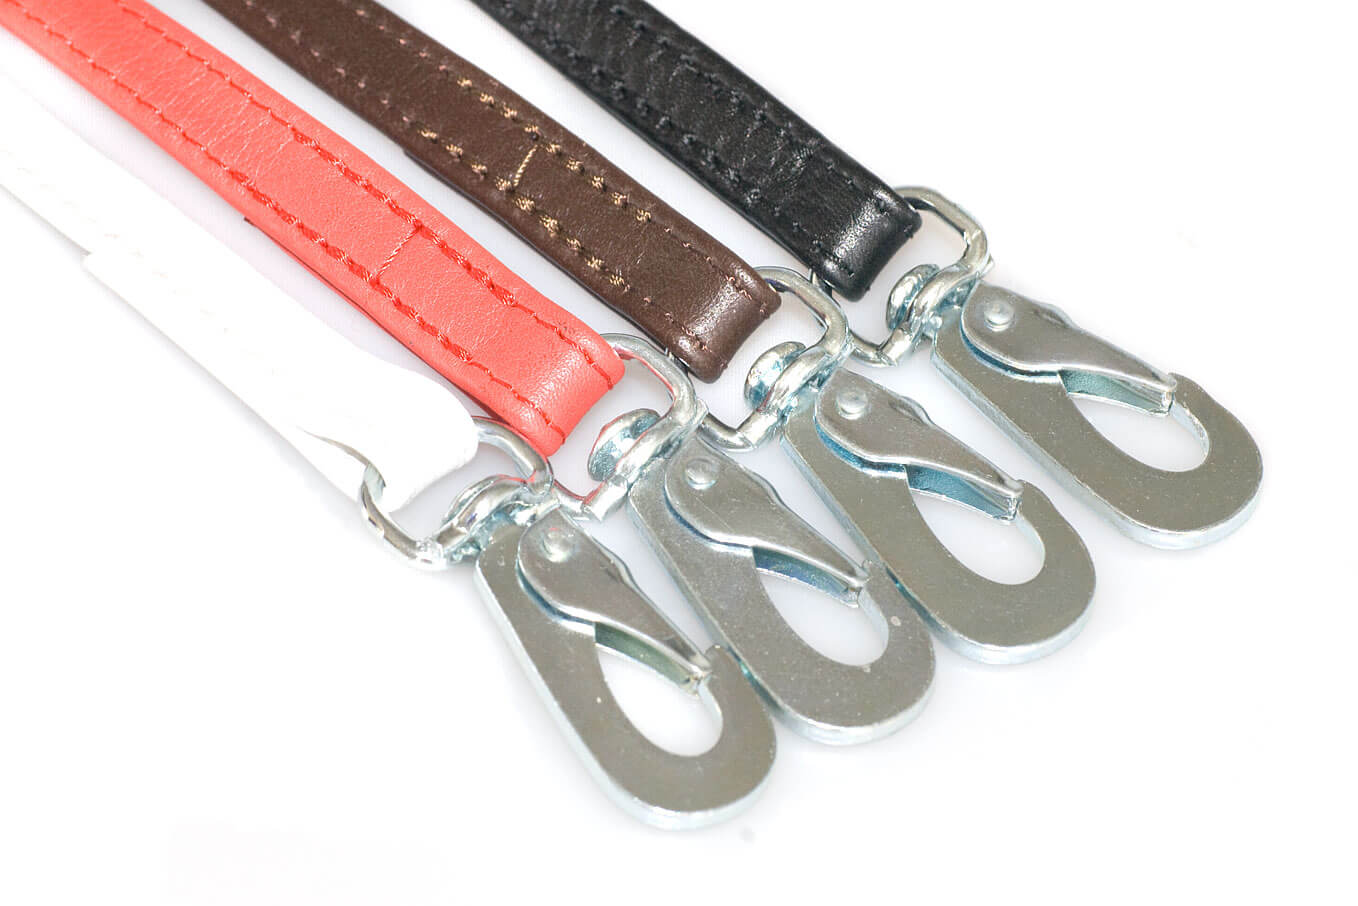 Soft nappa leather dog show leads in red, white. black and brown